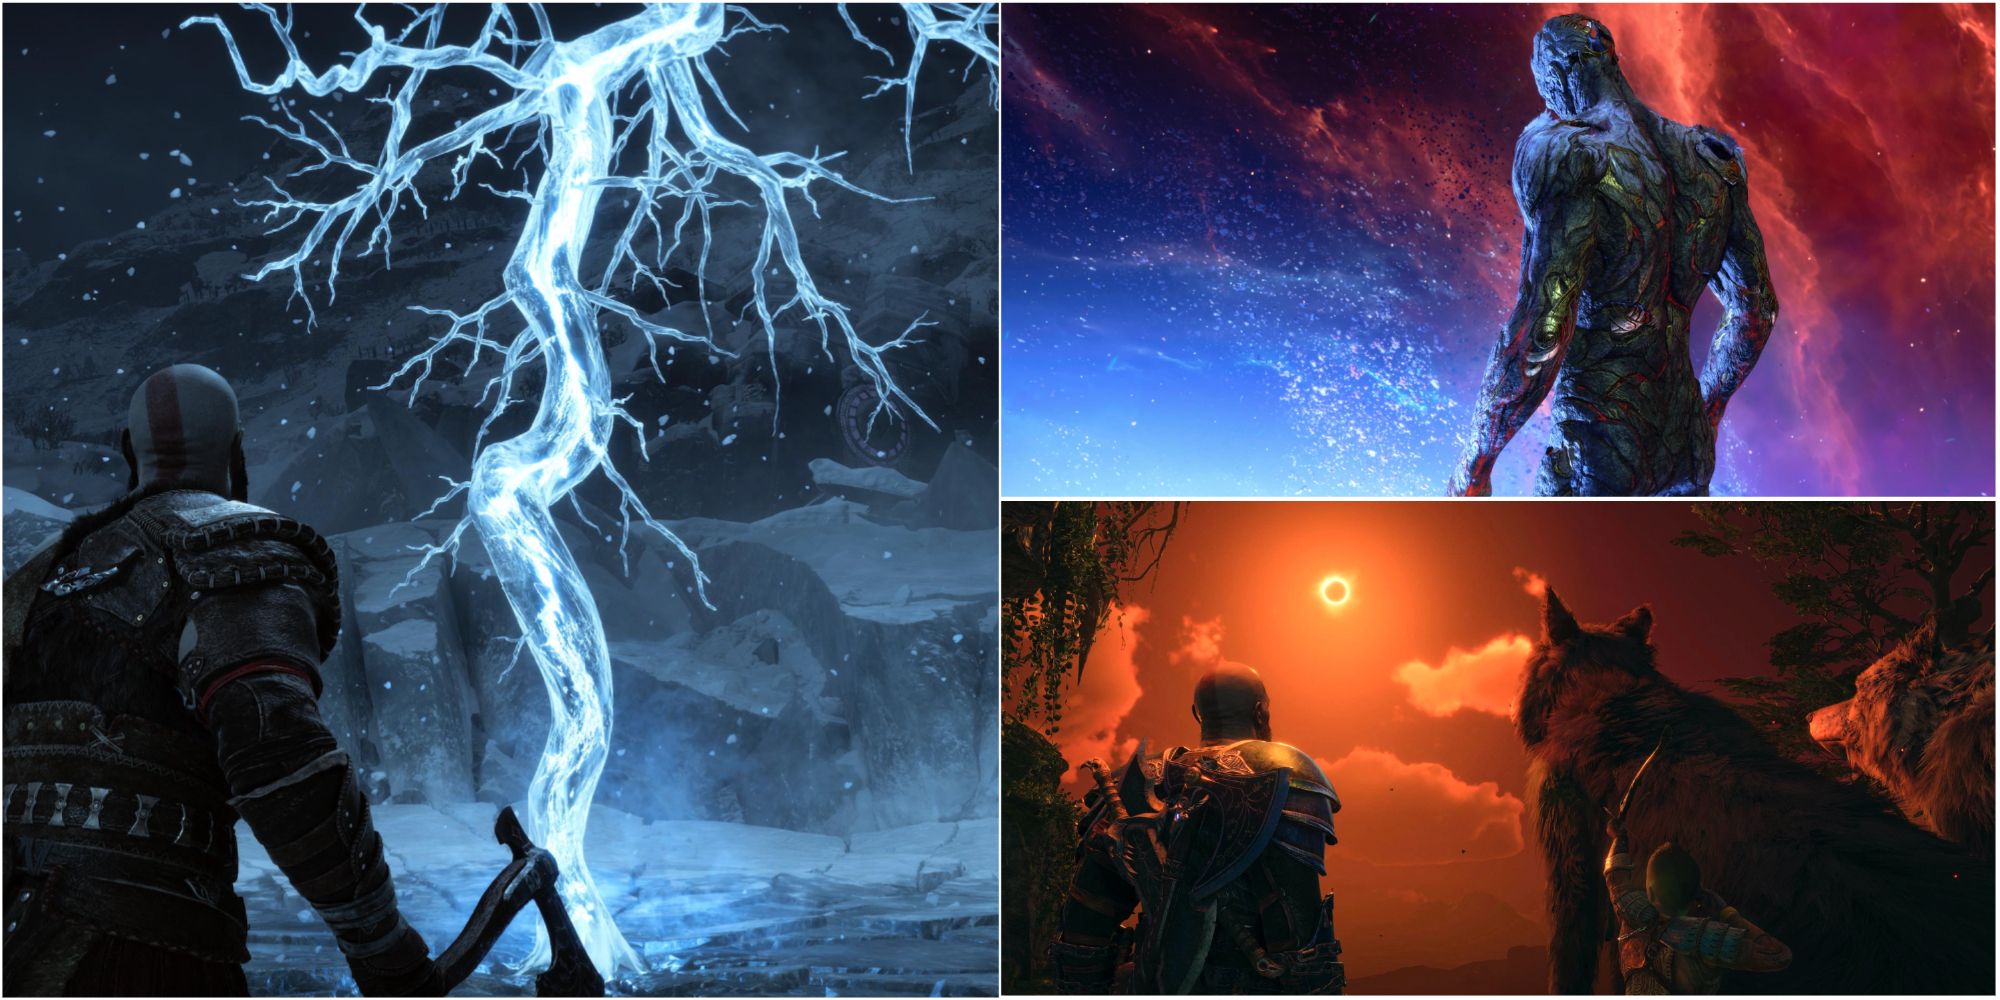 Kratos in front of frozen lightning, Surtr in The Spark of the World, Atreus Shoots Arrow at Eclipse